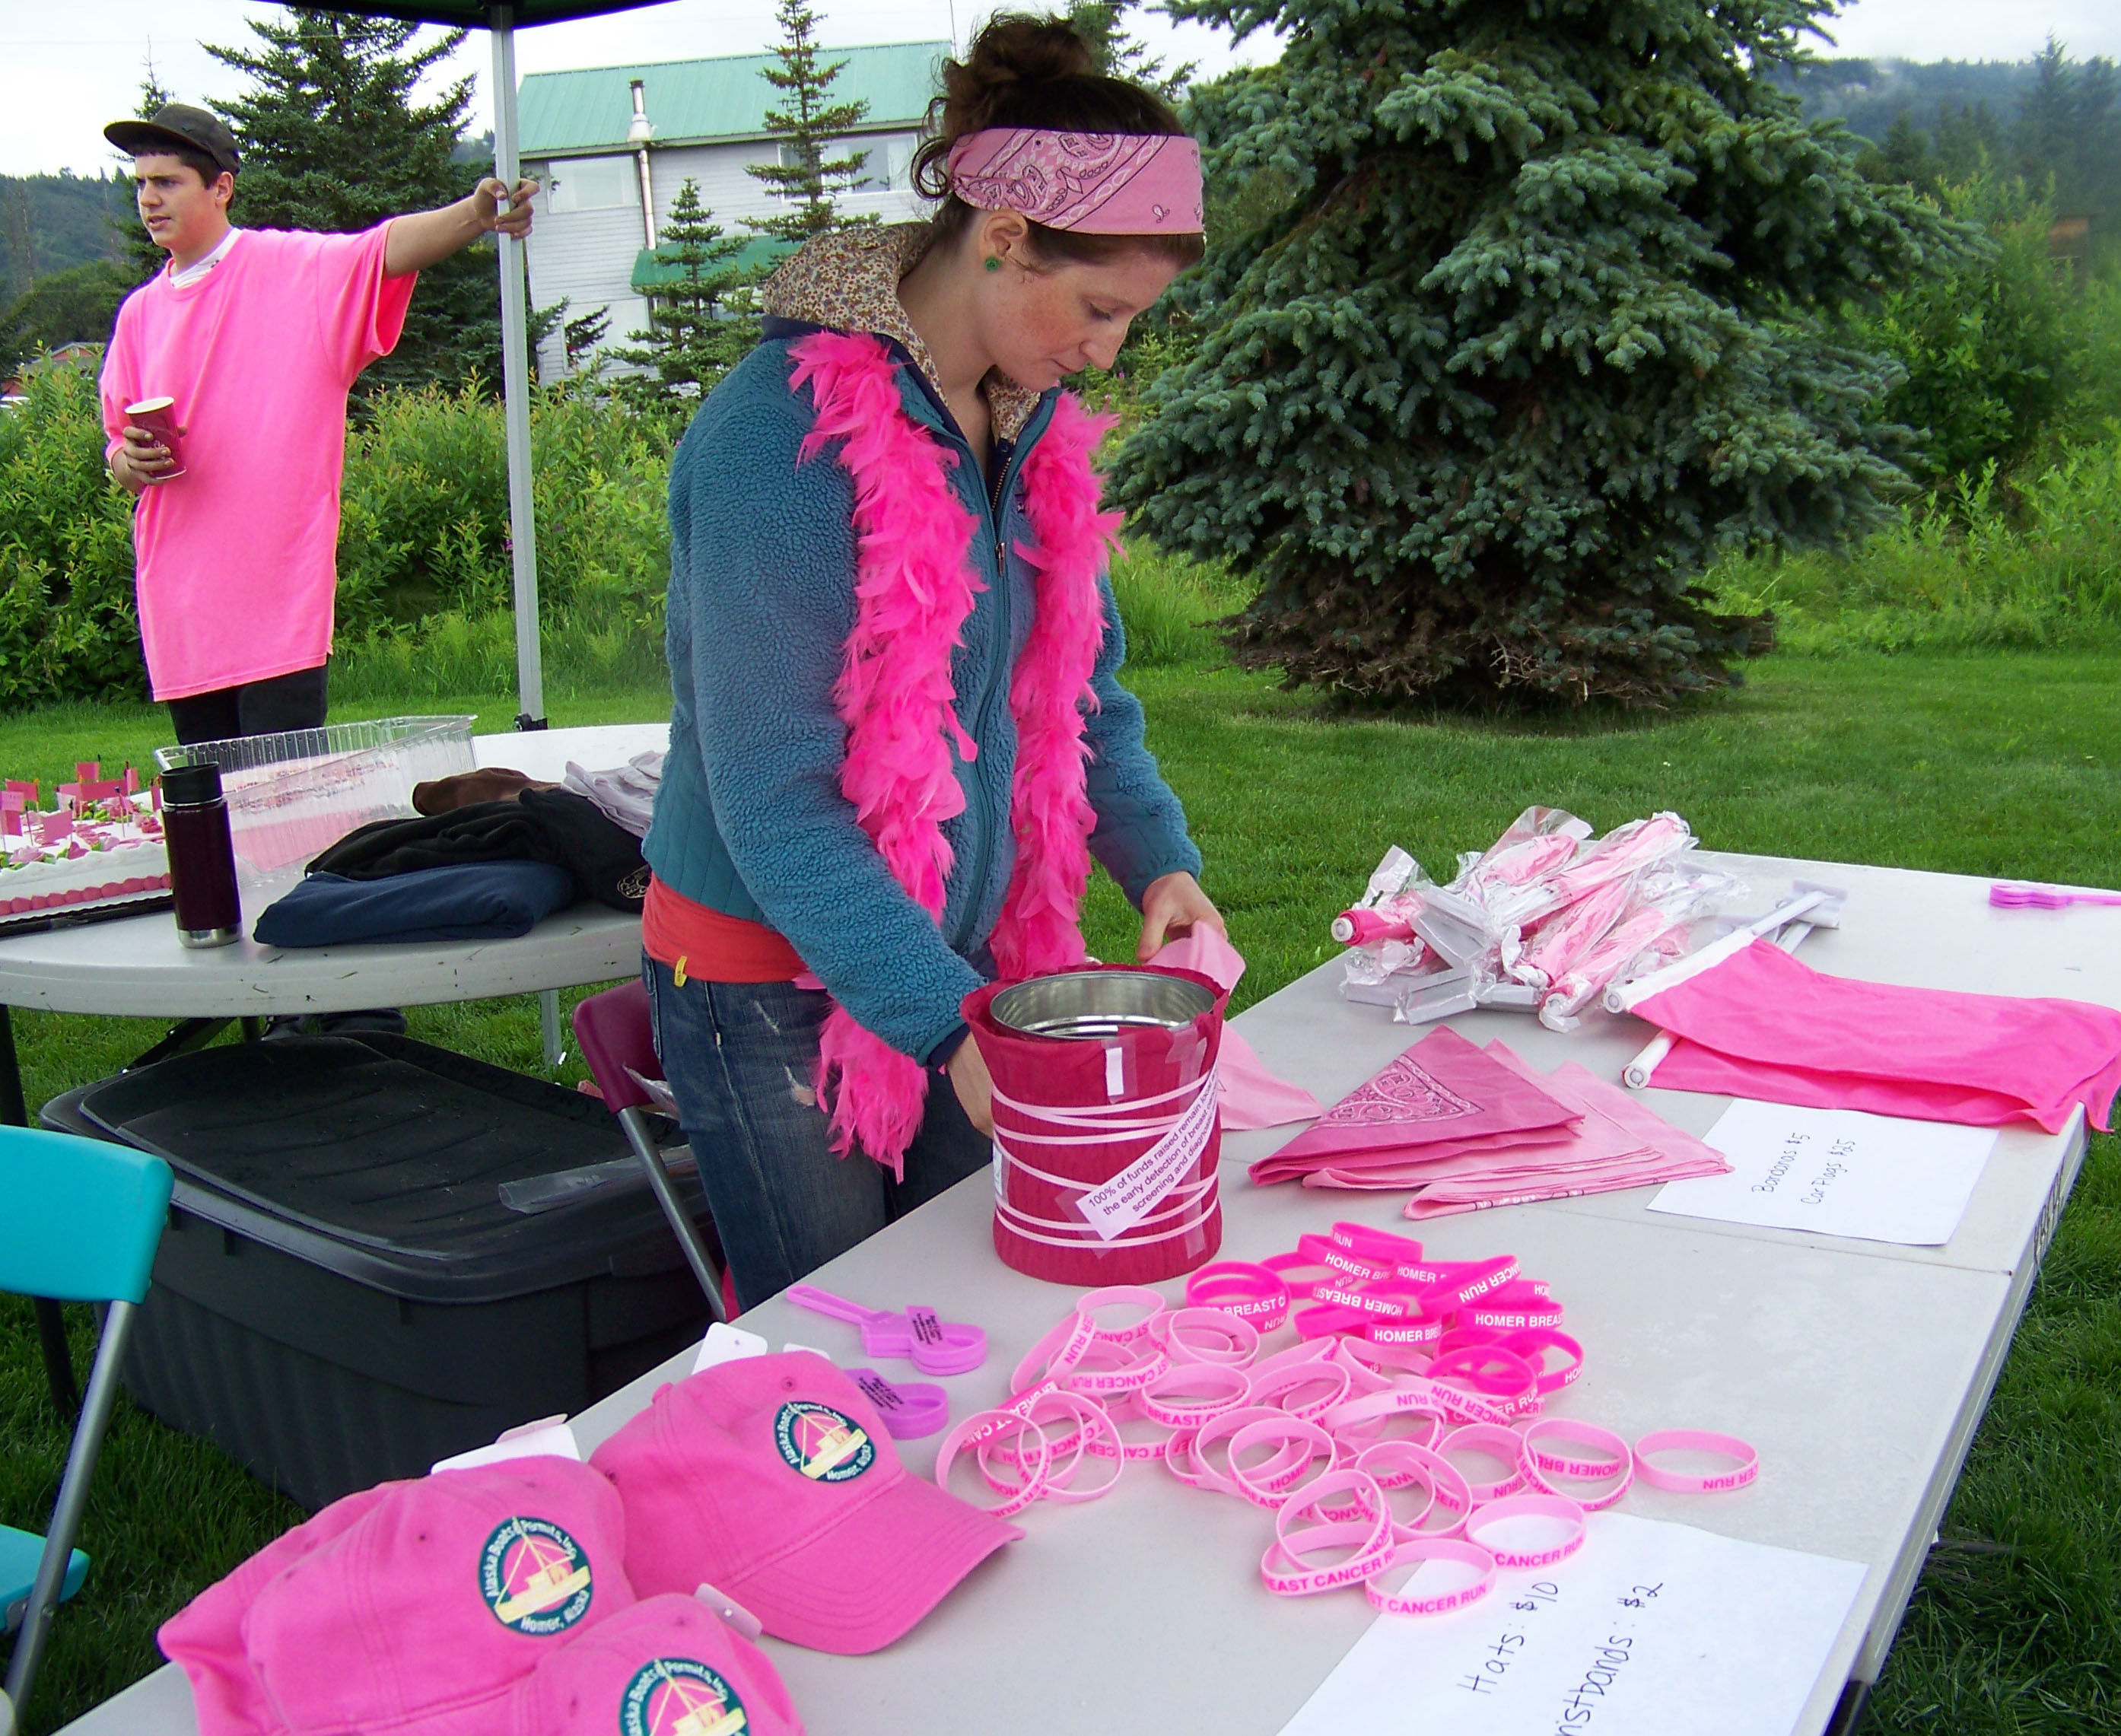 Clare Wheeler, a clinic assistant at Kachemak Bay Family Planning Clinic, ensures everyone at Sunday's Breast Cancer Run has something to wear that's pink, the color associated with breast cancer awareness. -Photo by McKibben Jackinsky,  Homer News